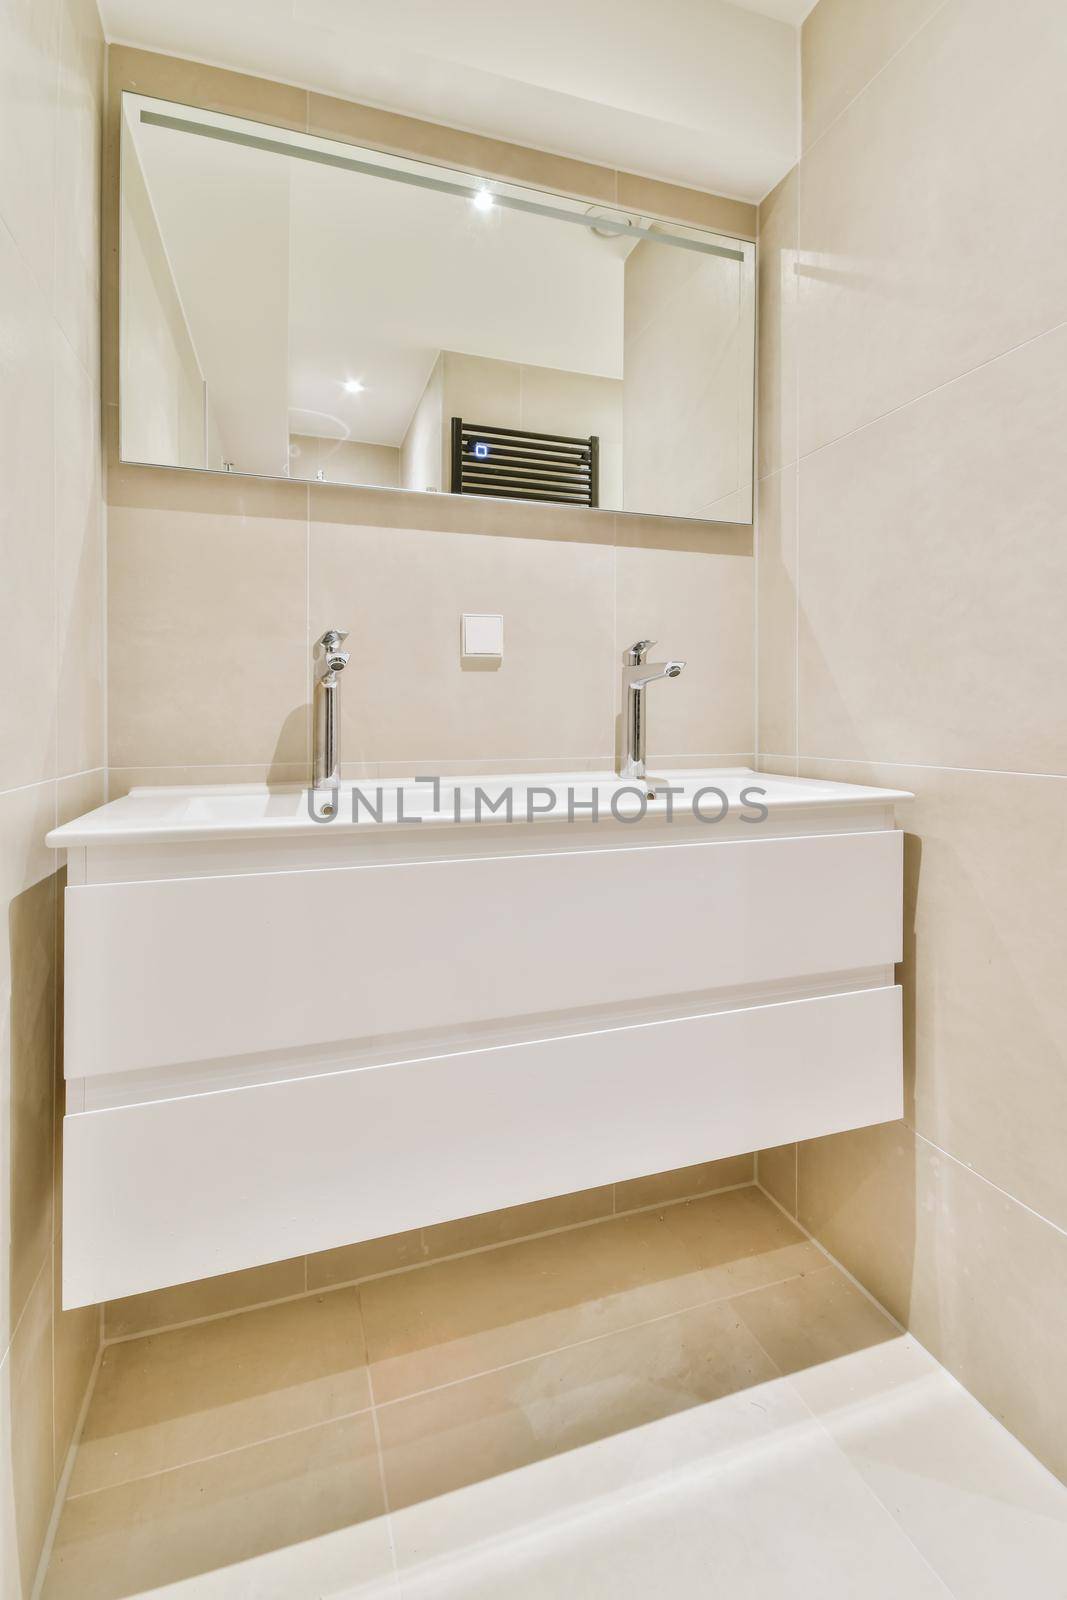 Expensive vessel sink made of natural stone with white faucet under mirror in bathroom